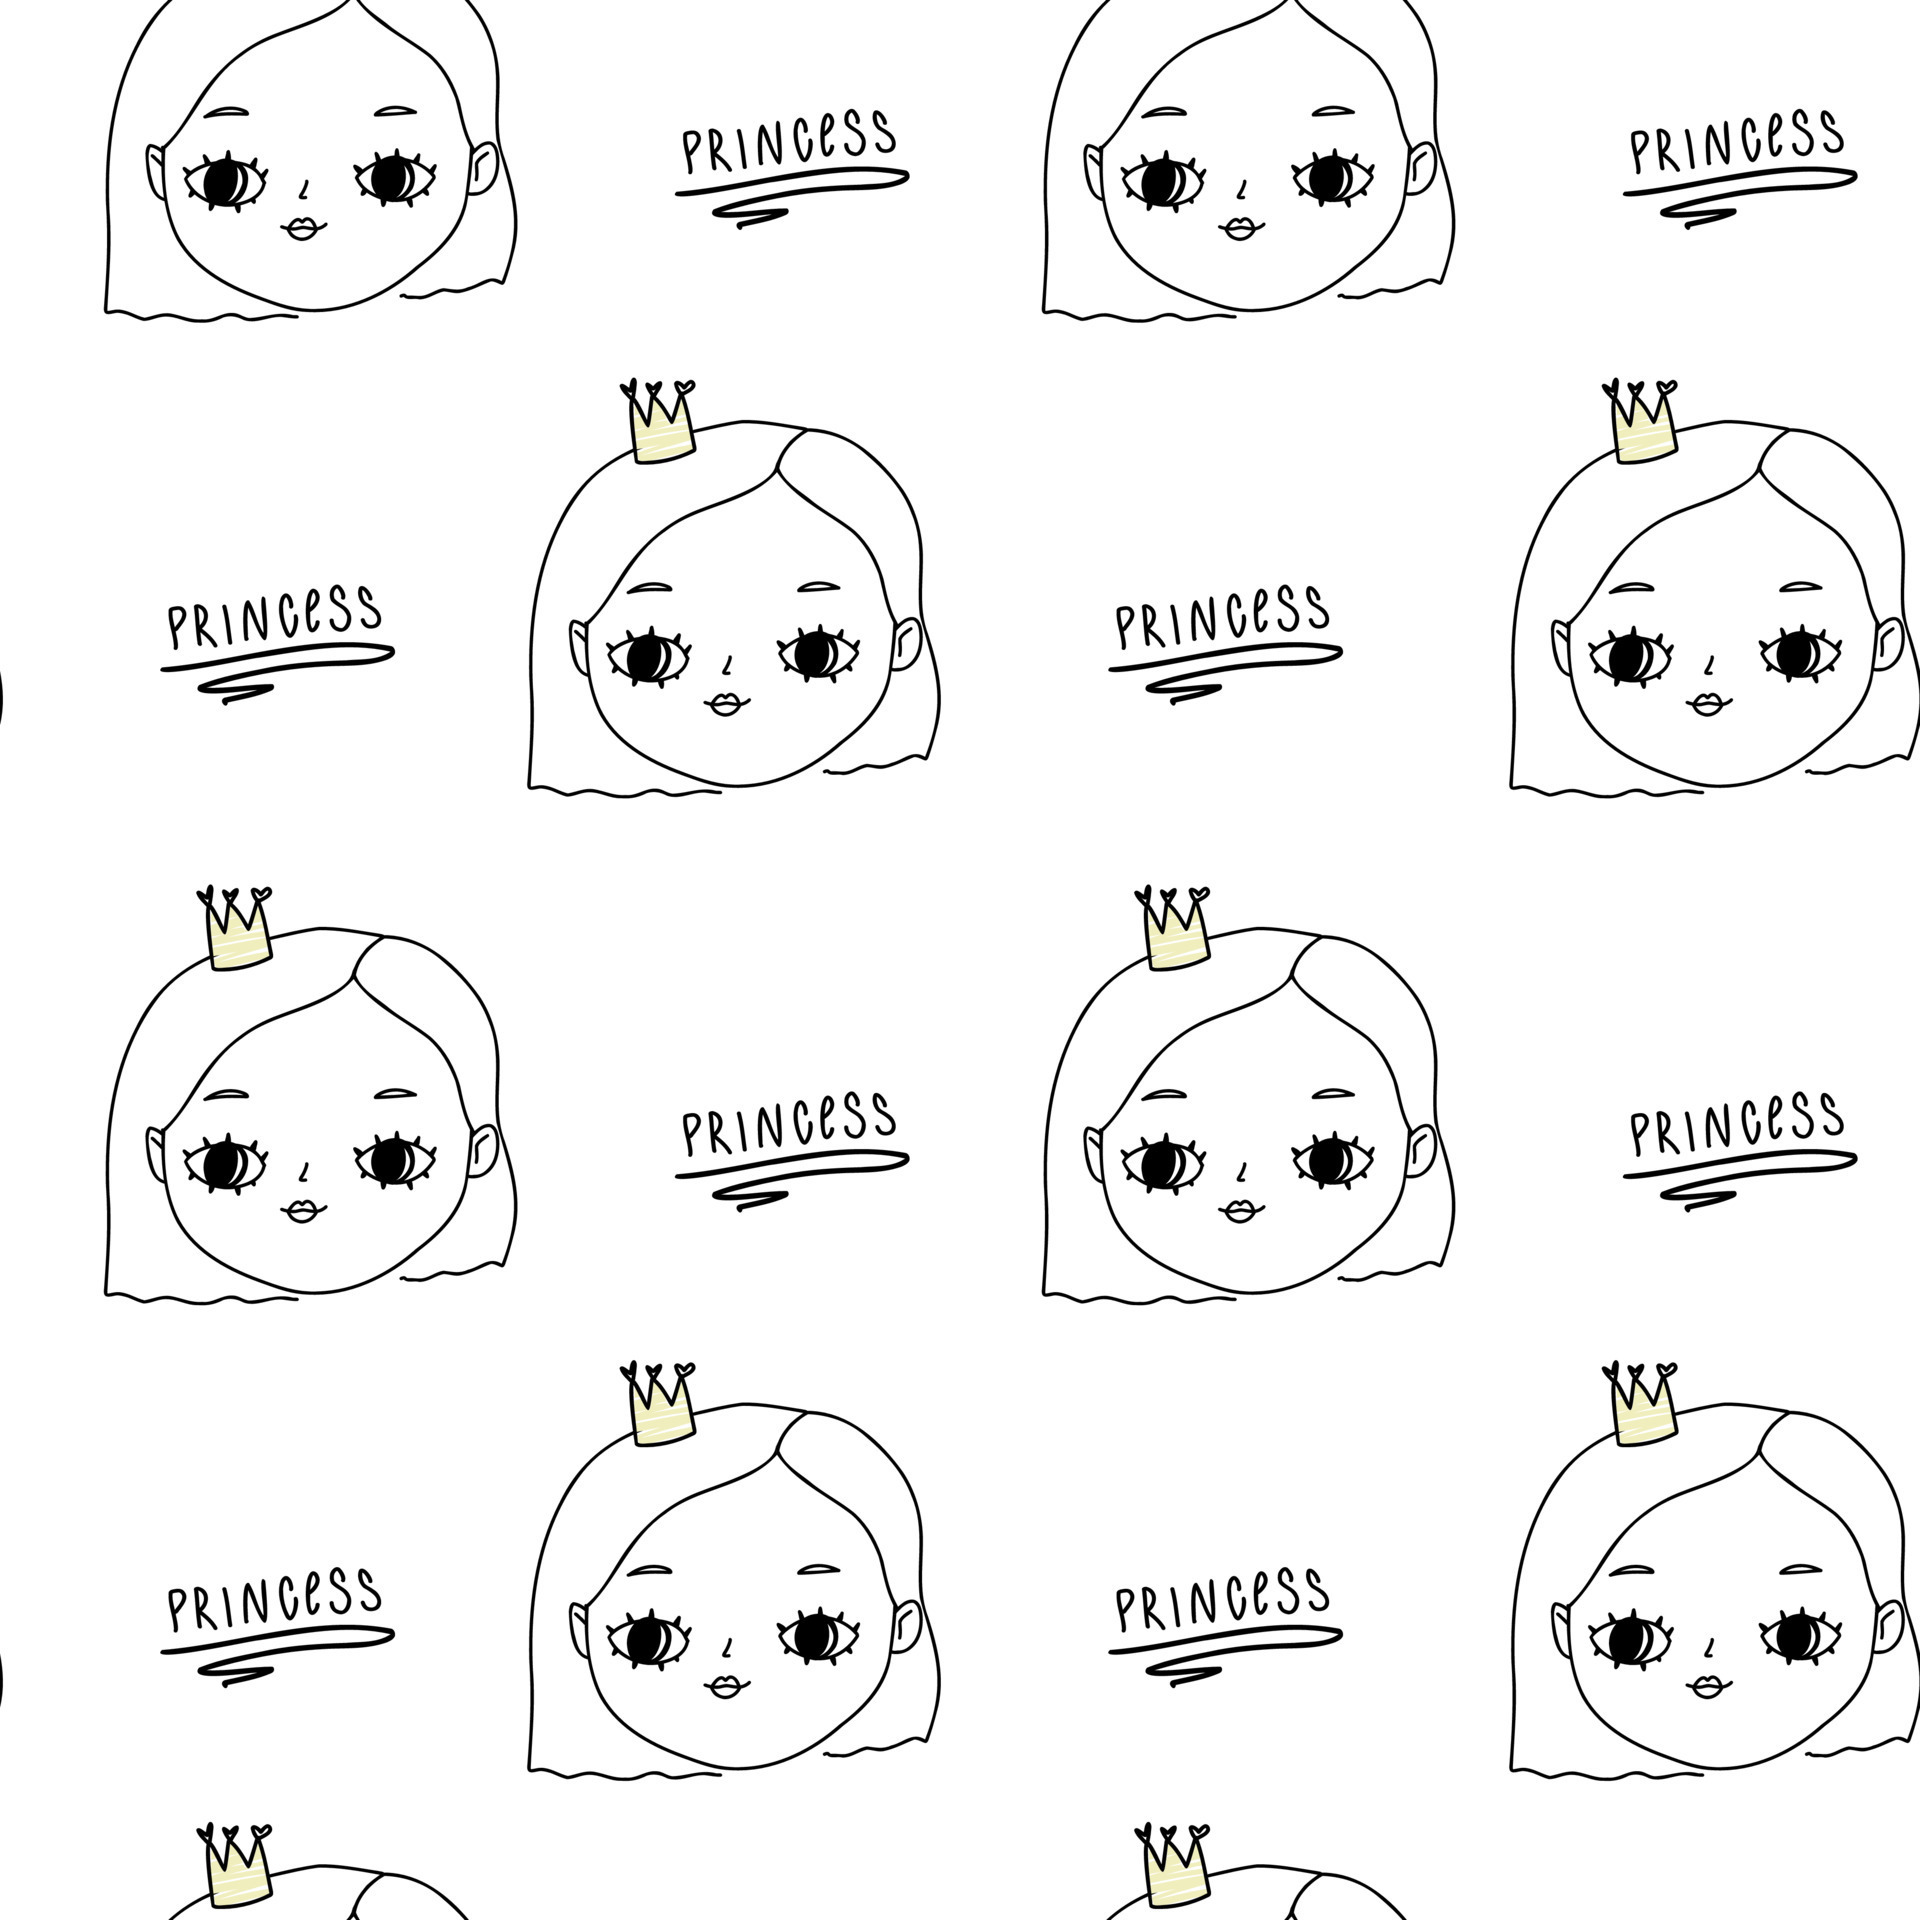 https://static.vecteezy.com/system/resources/previews/008/151/742/original/cute-white-pattern-with-crown-little-girl-faces-princess-text-seamless-background-textiles-for-children-digital-paper-scrapbook-vector.jpg